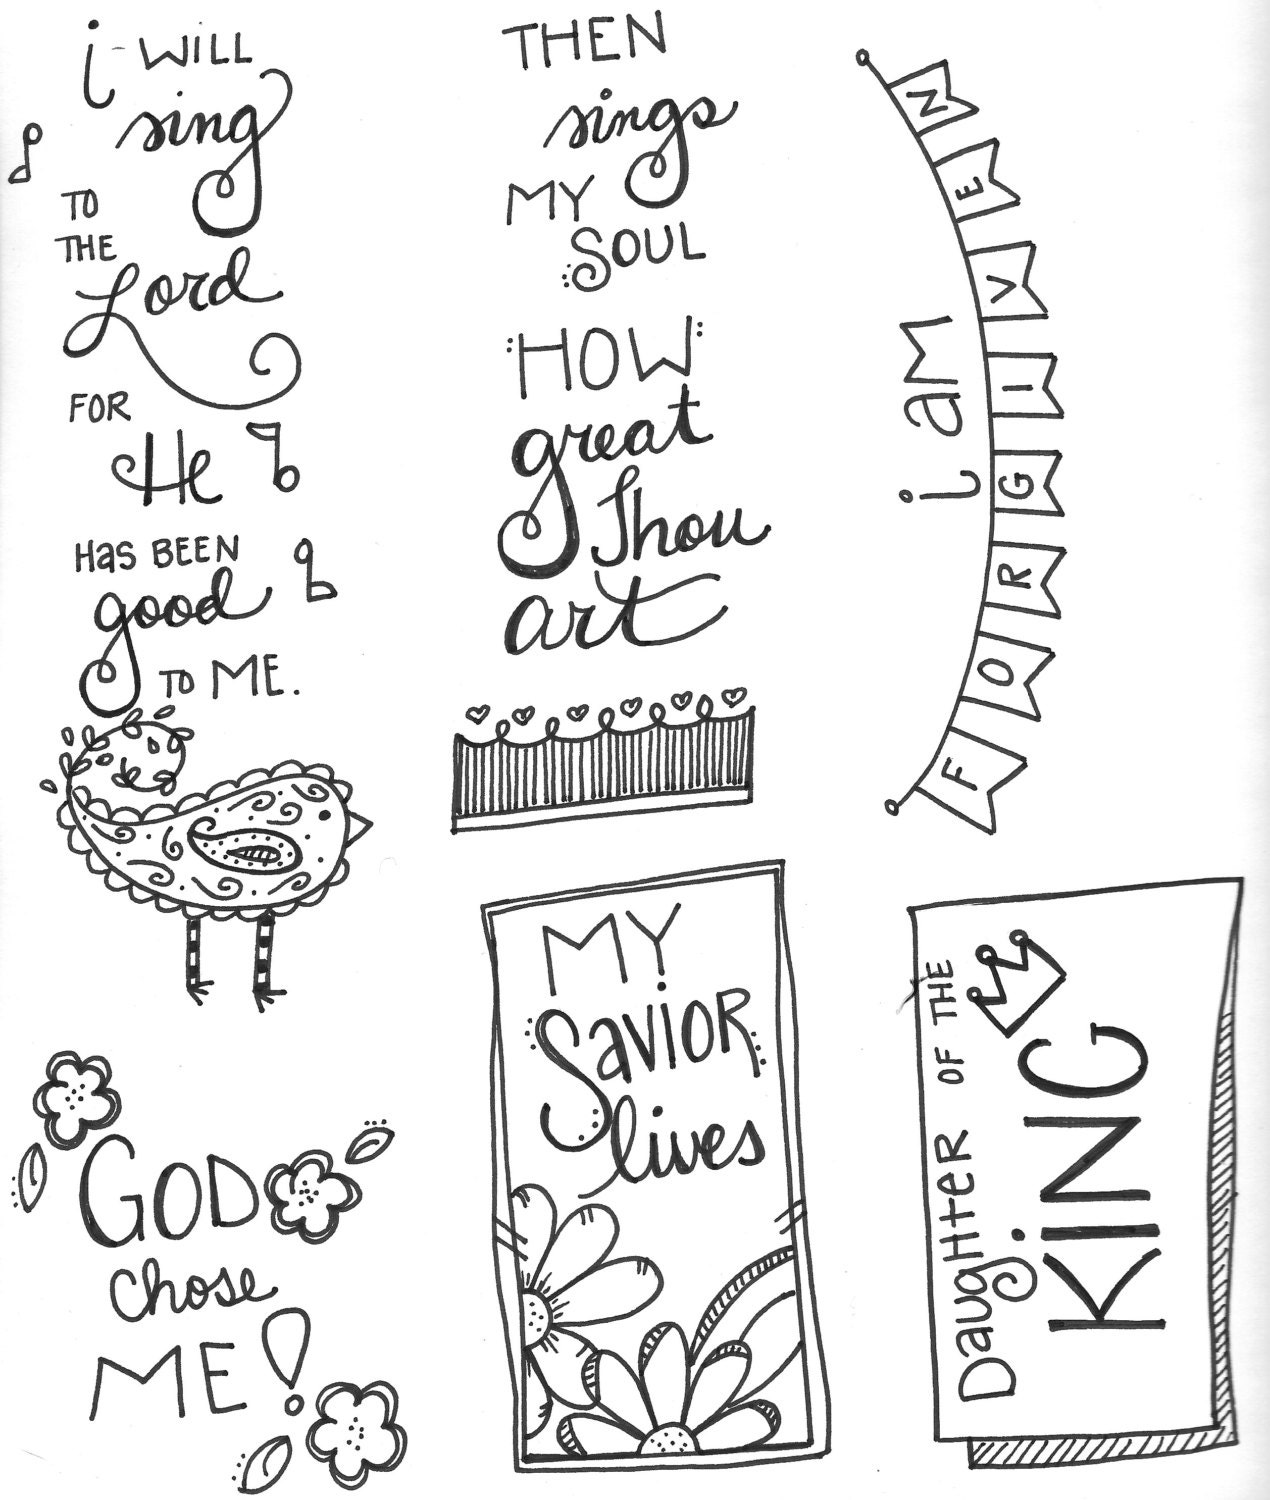 Bible Journaling: Faithful Promises 6 then Sings My Soul - Etsy